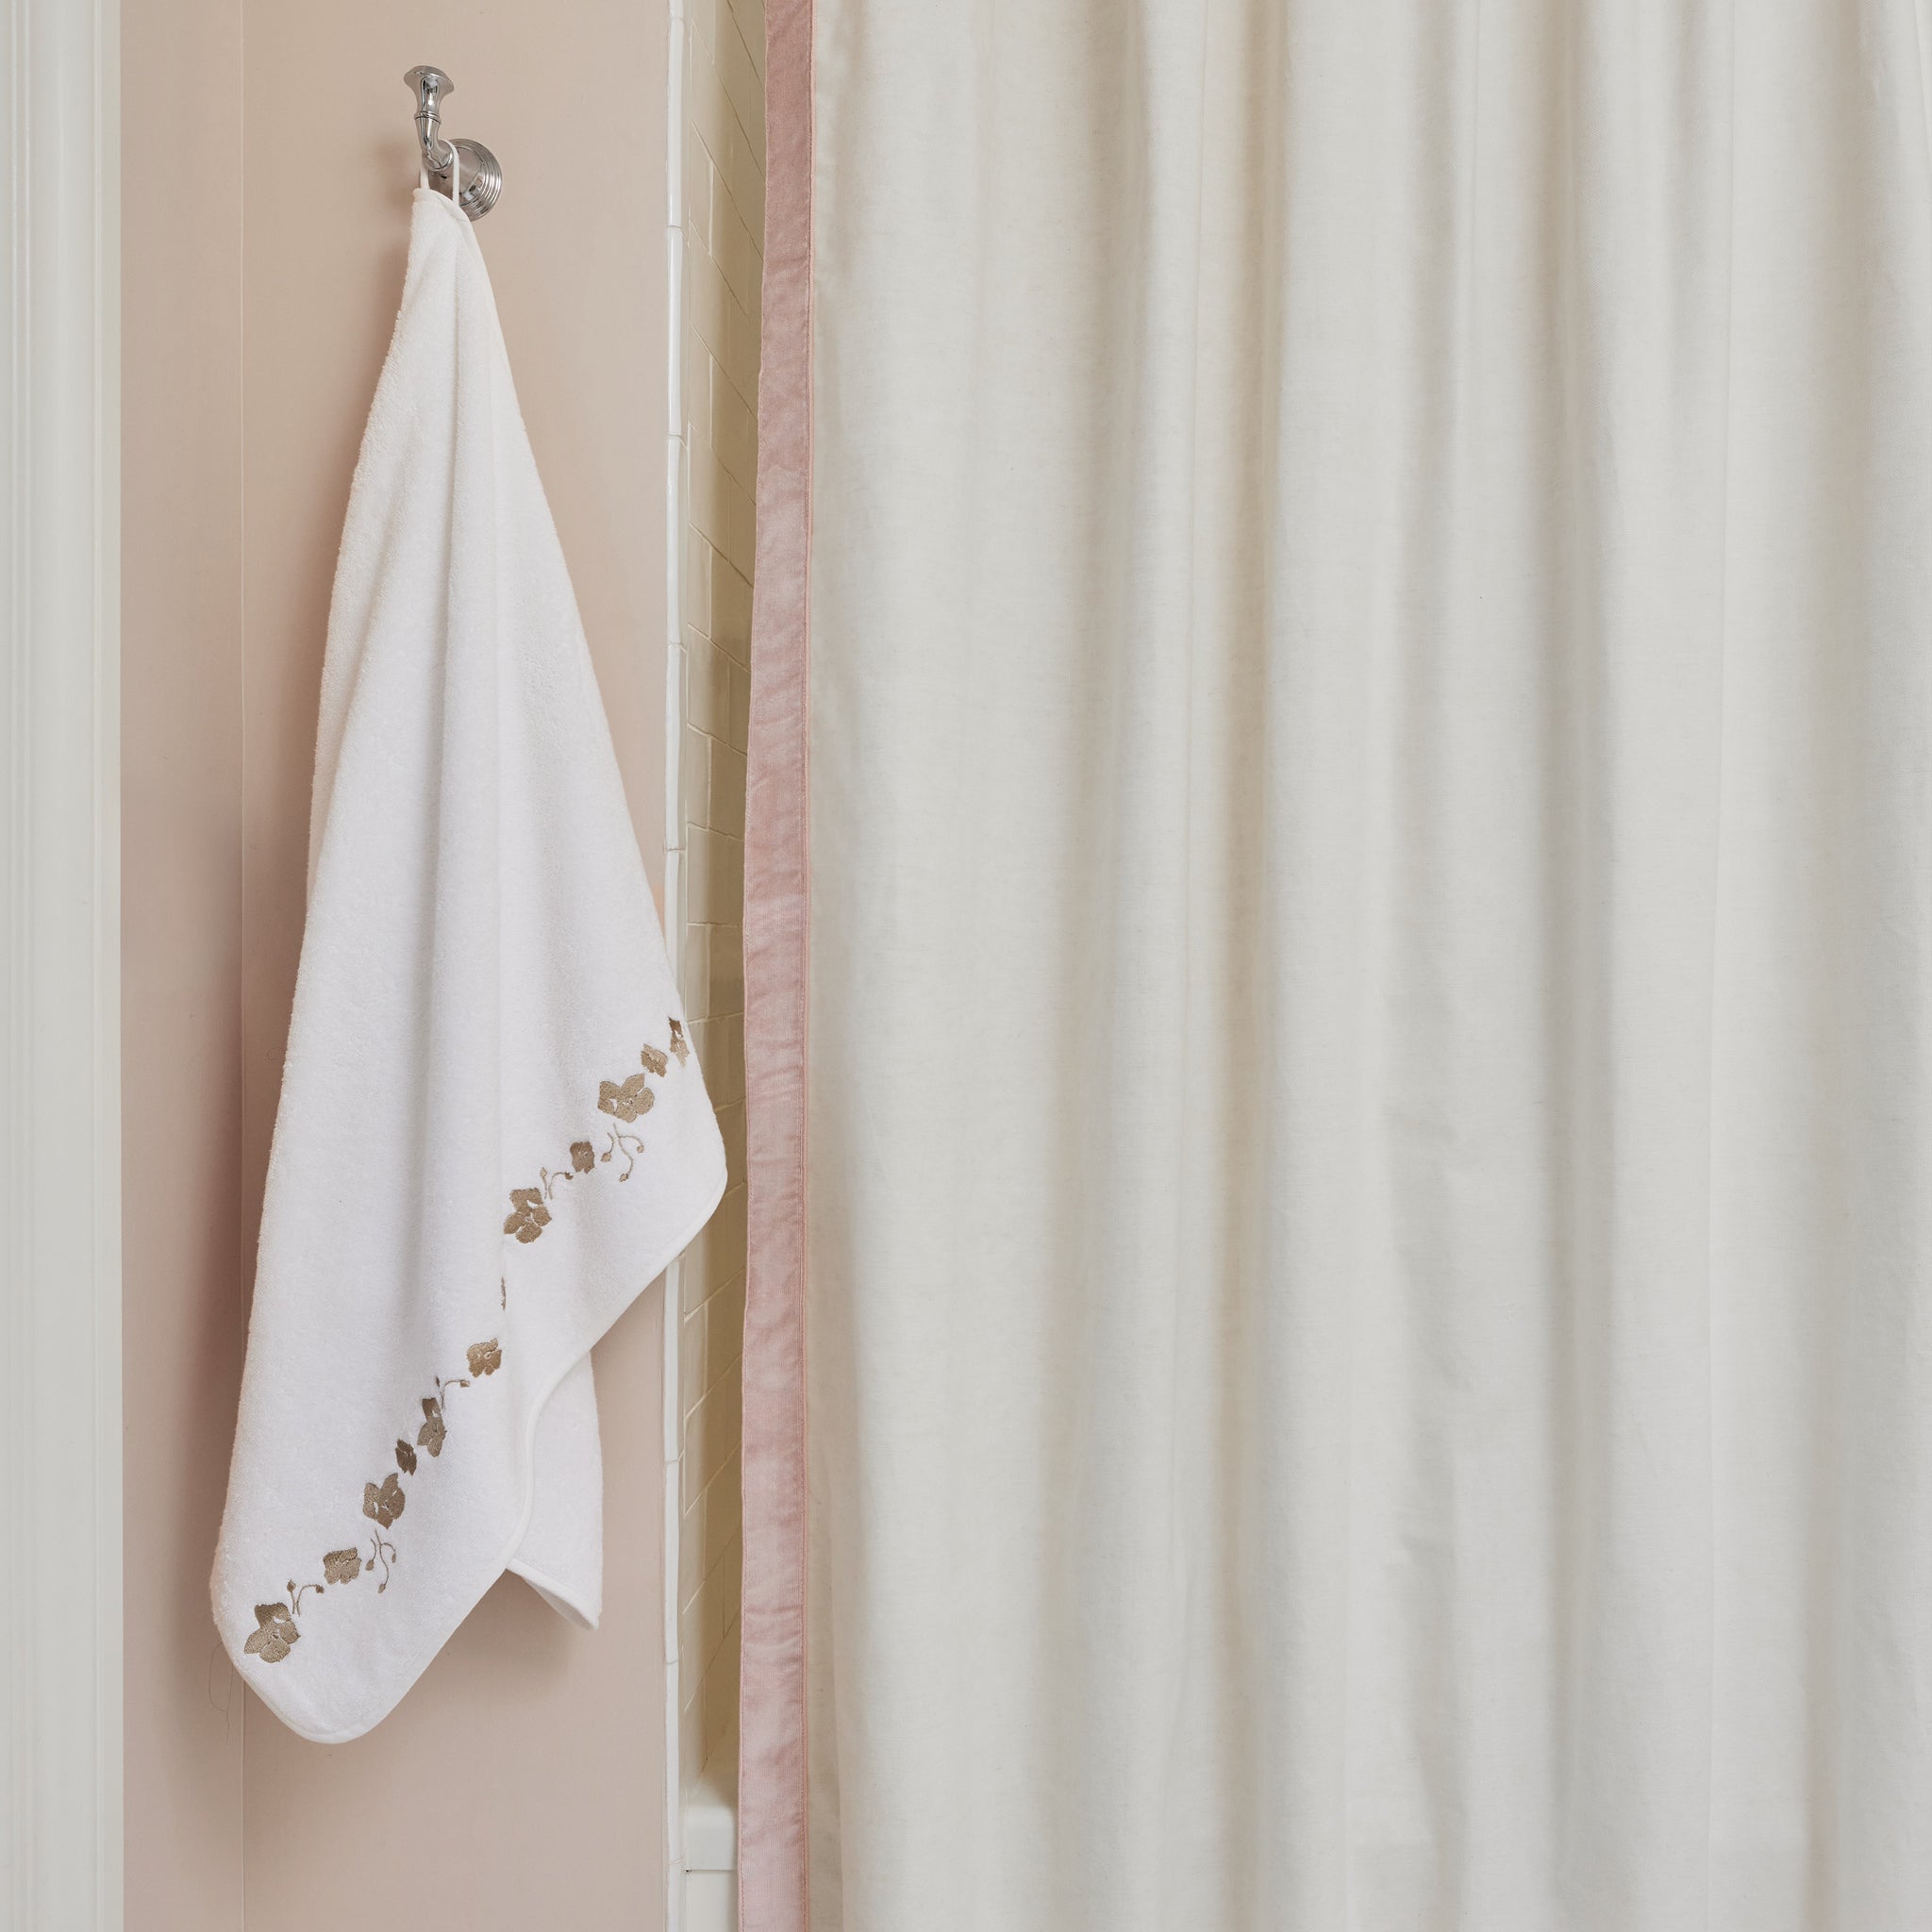 White towel with sand floral embroidery hanging on a hook next to a white shower curtain hanging on a tub in a bathroom with light pink walls